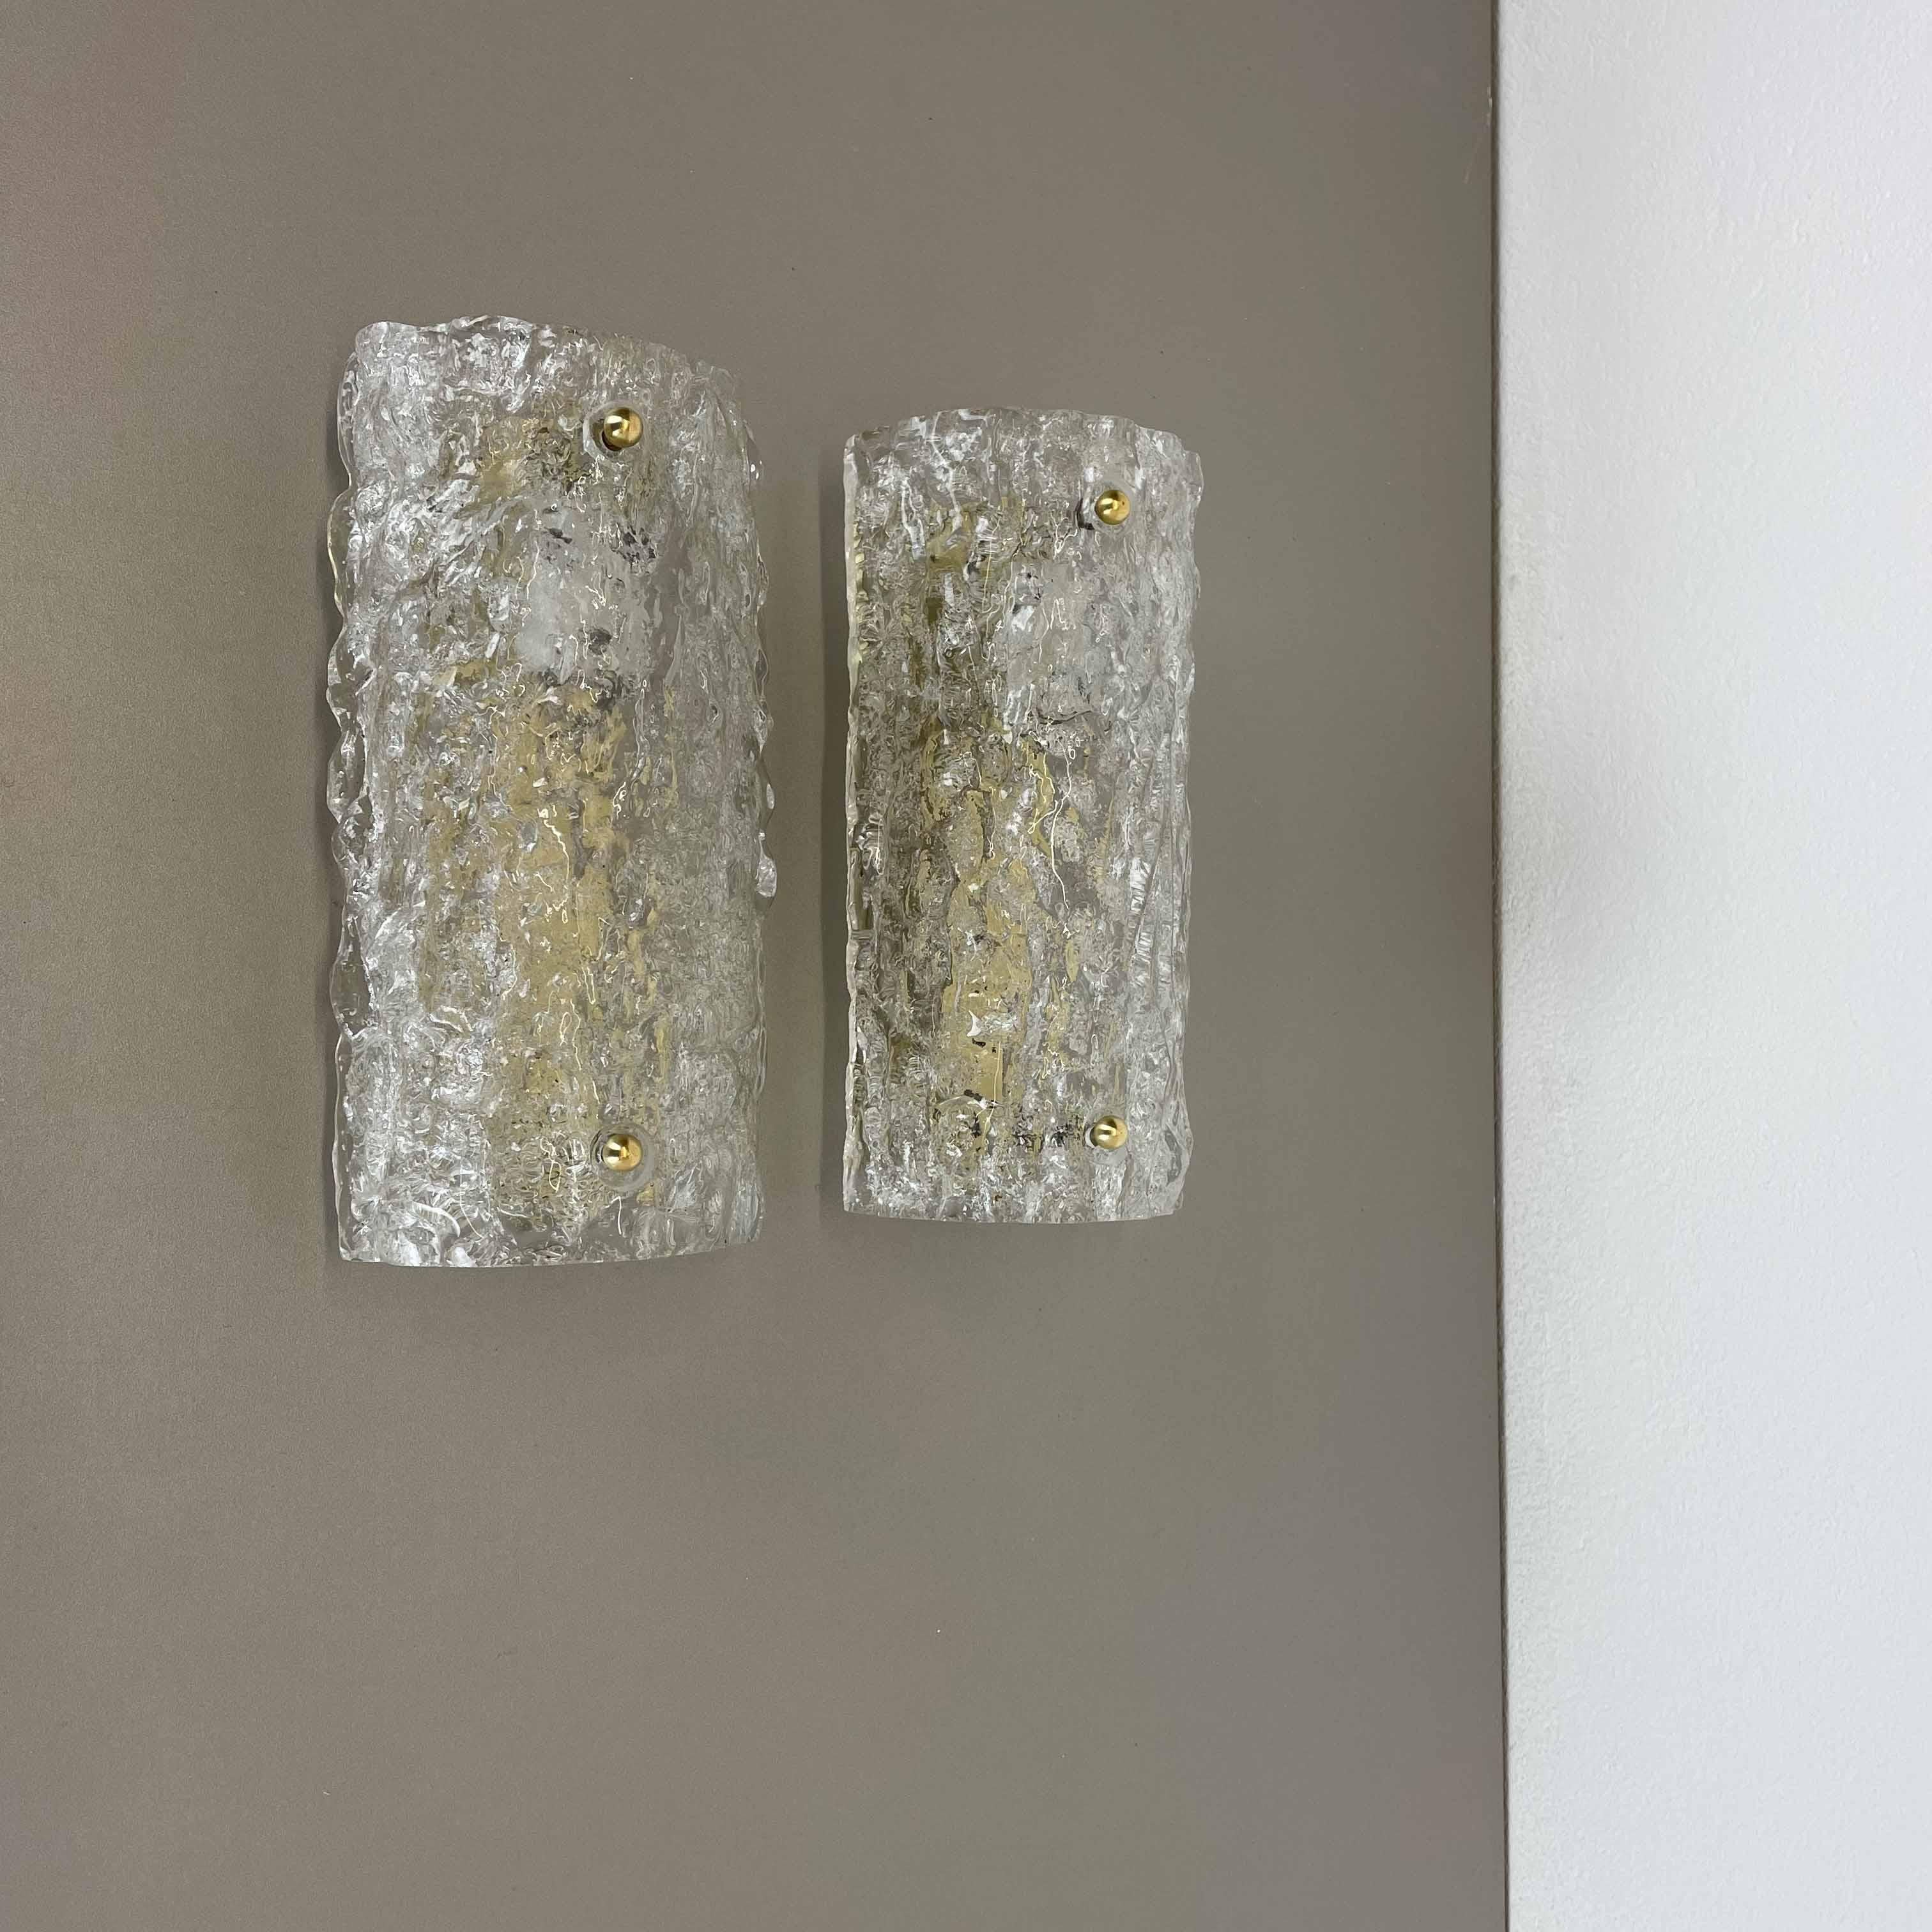 Article:

Set of two

Wall light sconces


Origin:

Germany



Age:

1970s



This set of two modernist lights was produced in Germany in the 1970s. It is made from heavy glass and has a metal wall fixation. The lights have a